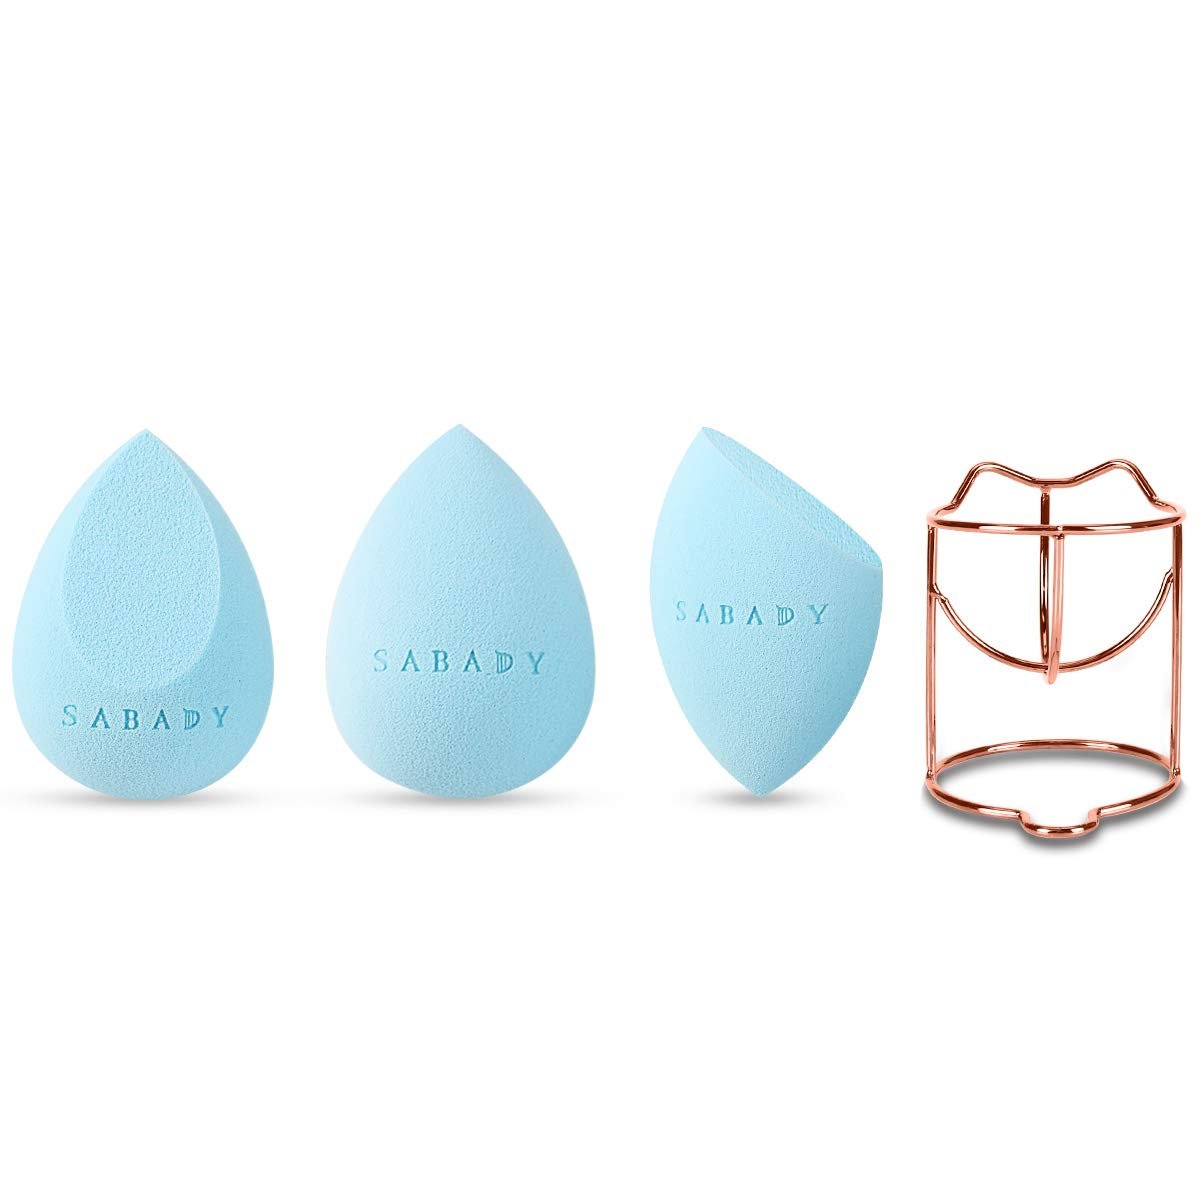 Book Cover SABADY 3+1 MAKEUP Beauty Sponge blenders Set With Travel Cases,RoseGold Holder, Multi-shaped,Durable,Soft,Latex-free Blending Sponges Perfect for Foundation,Powder&Cream,and All Skin Types(ROSE)